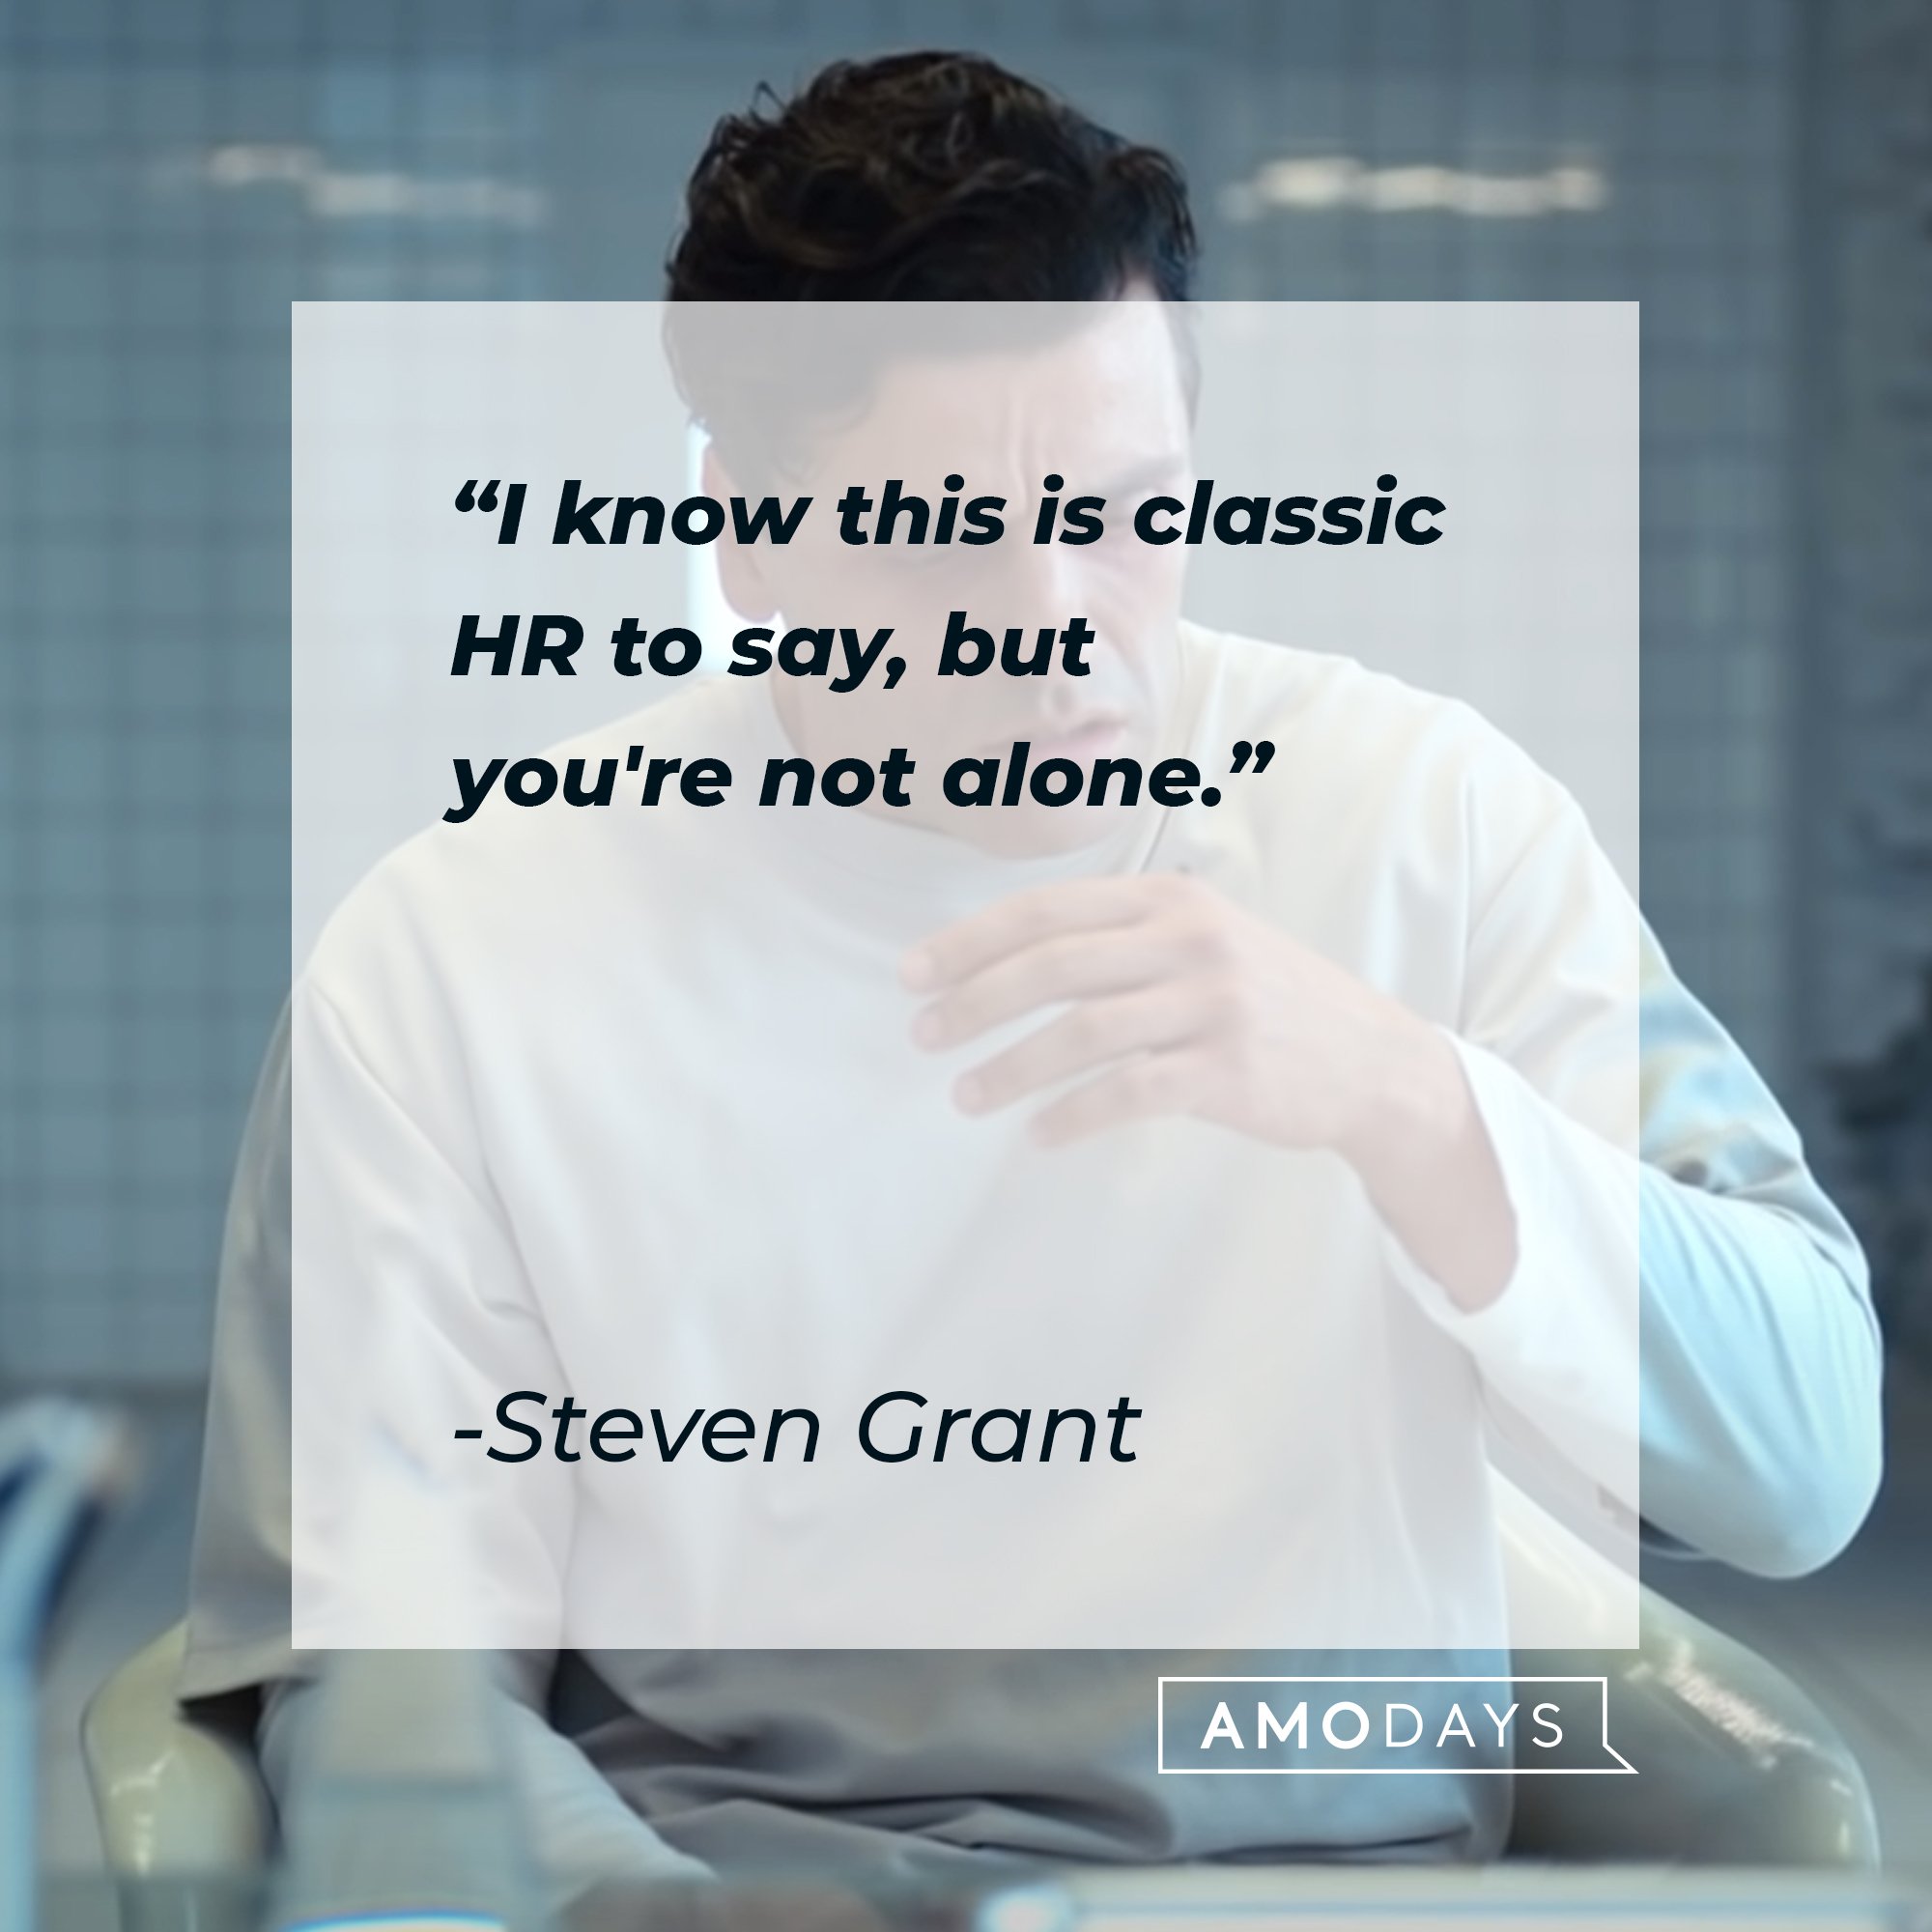  Steven Grant’s quote: "I know this is classic HR to say, but you're not alone." | Image: AmoDays